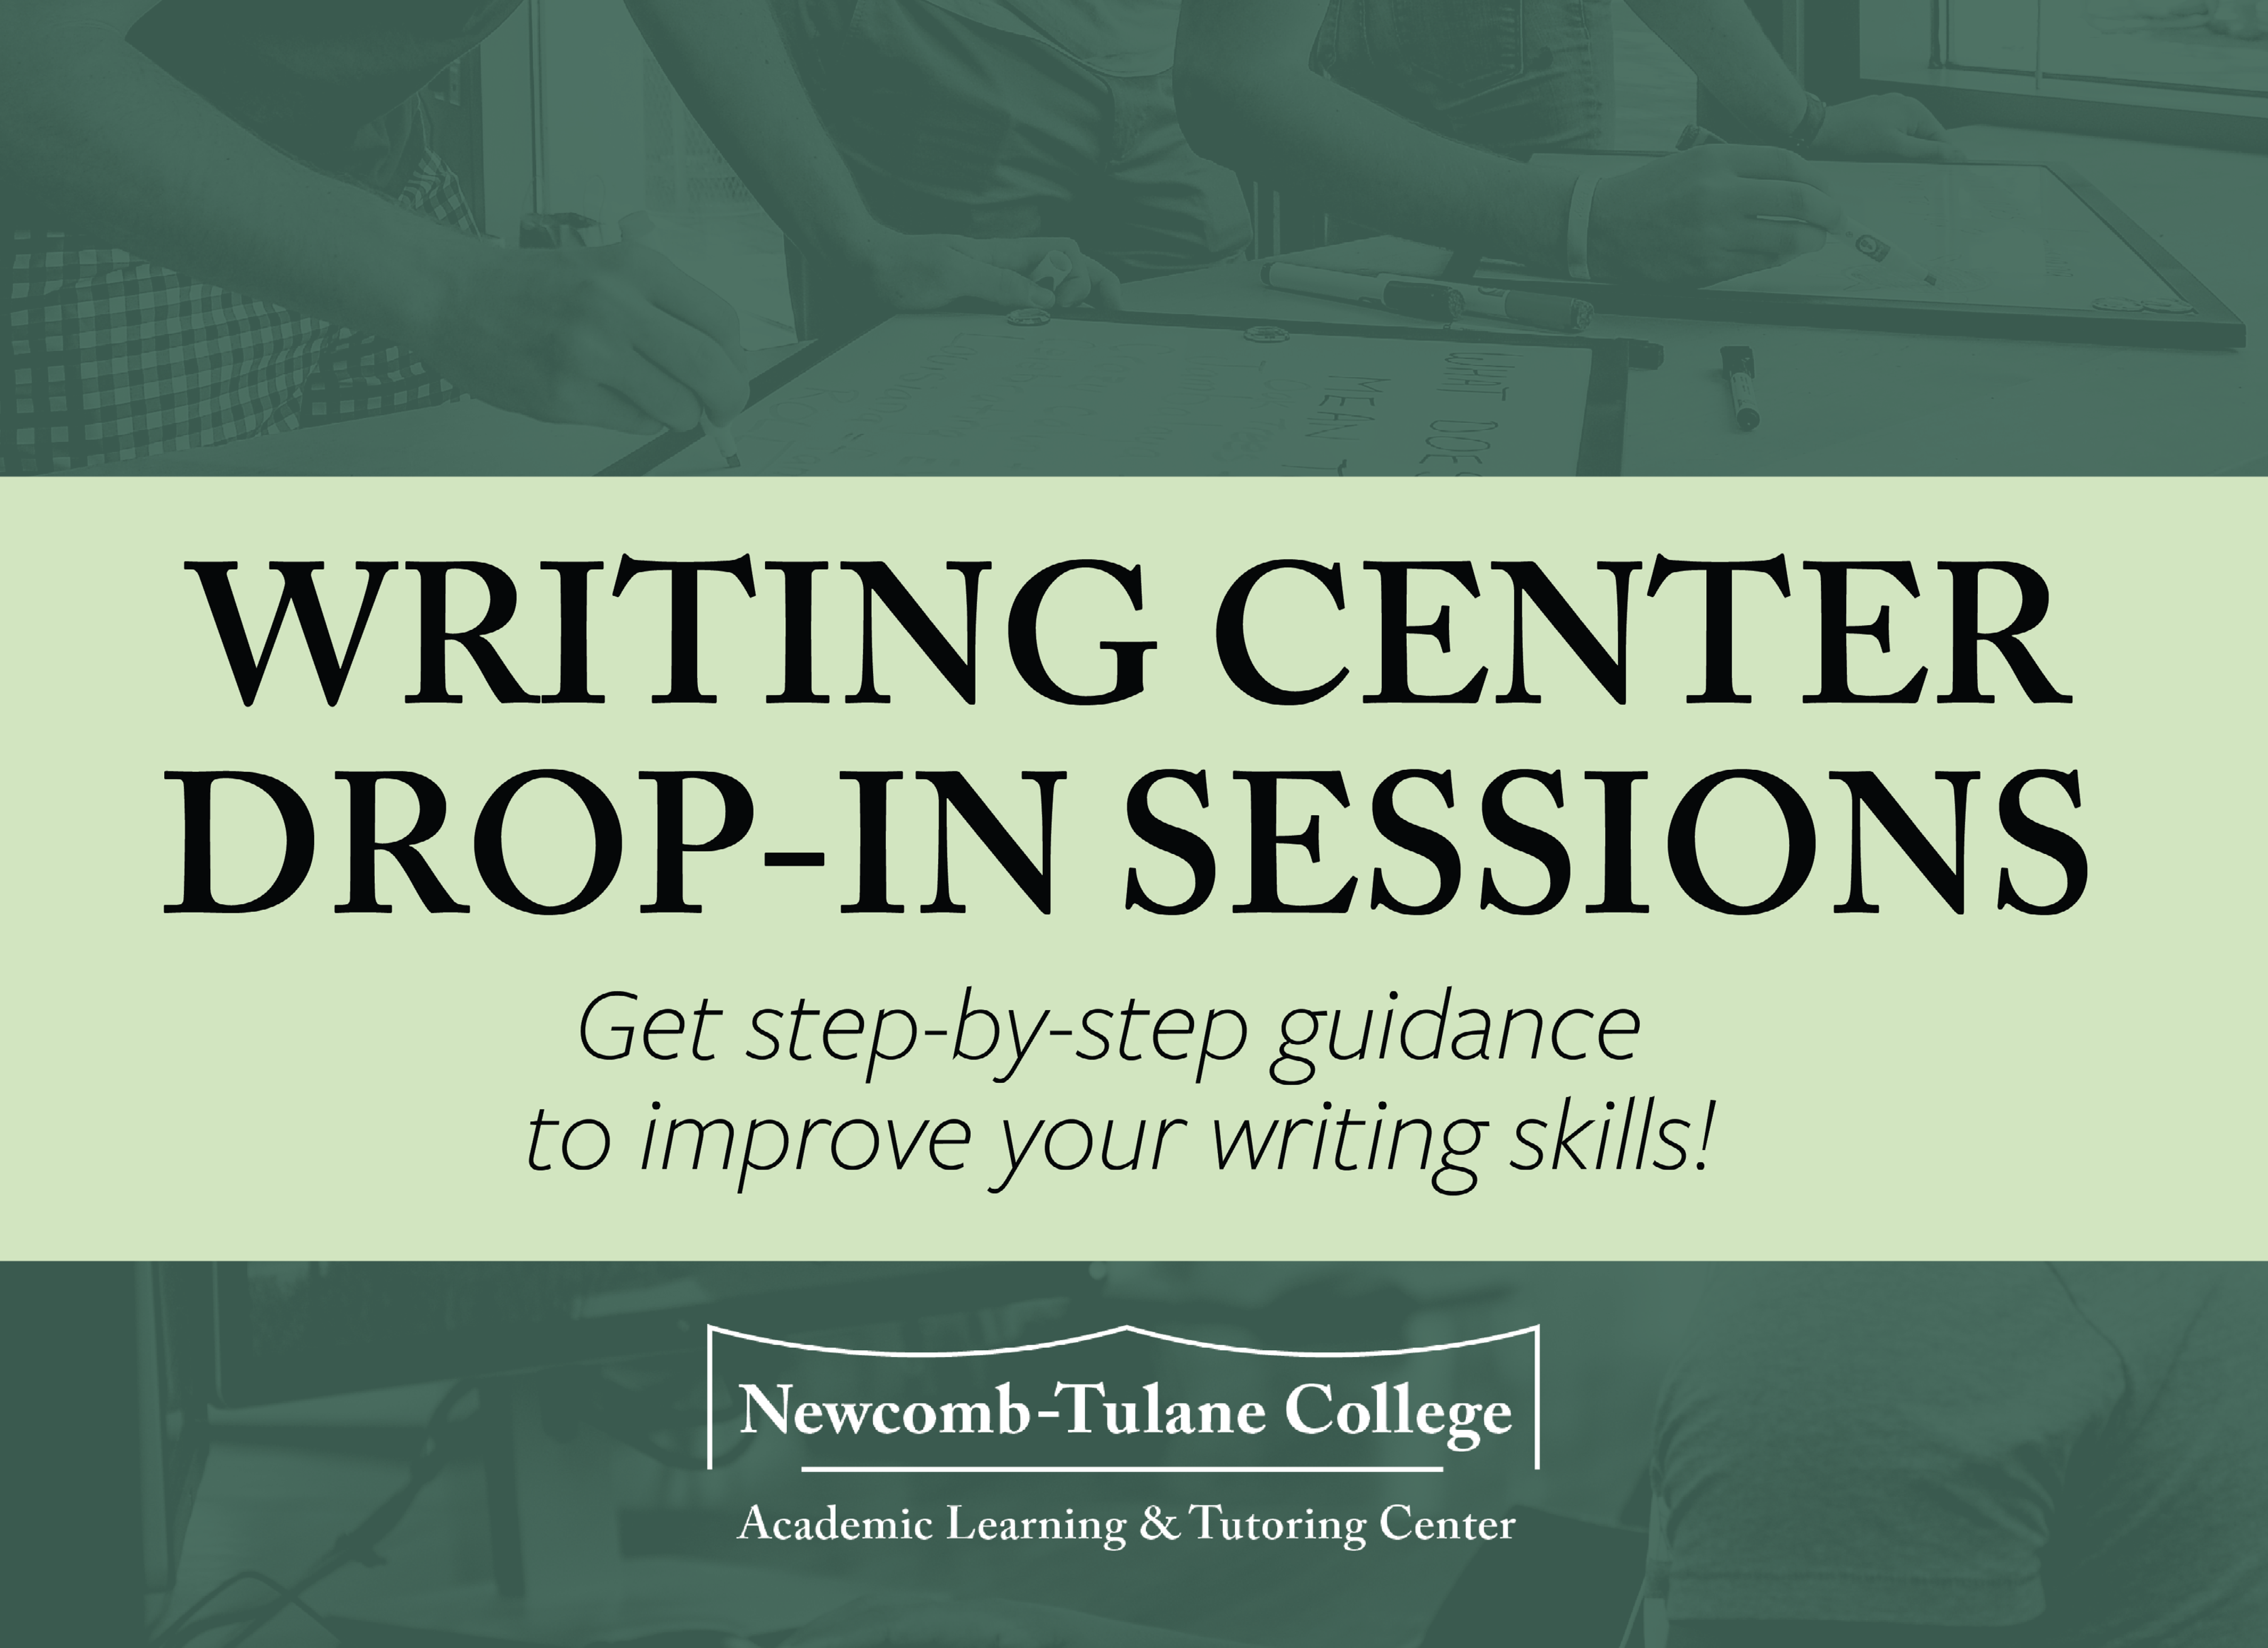 Writing Center Drop-In Sessions